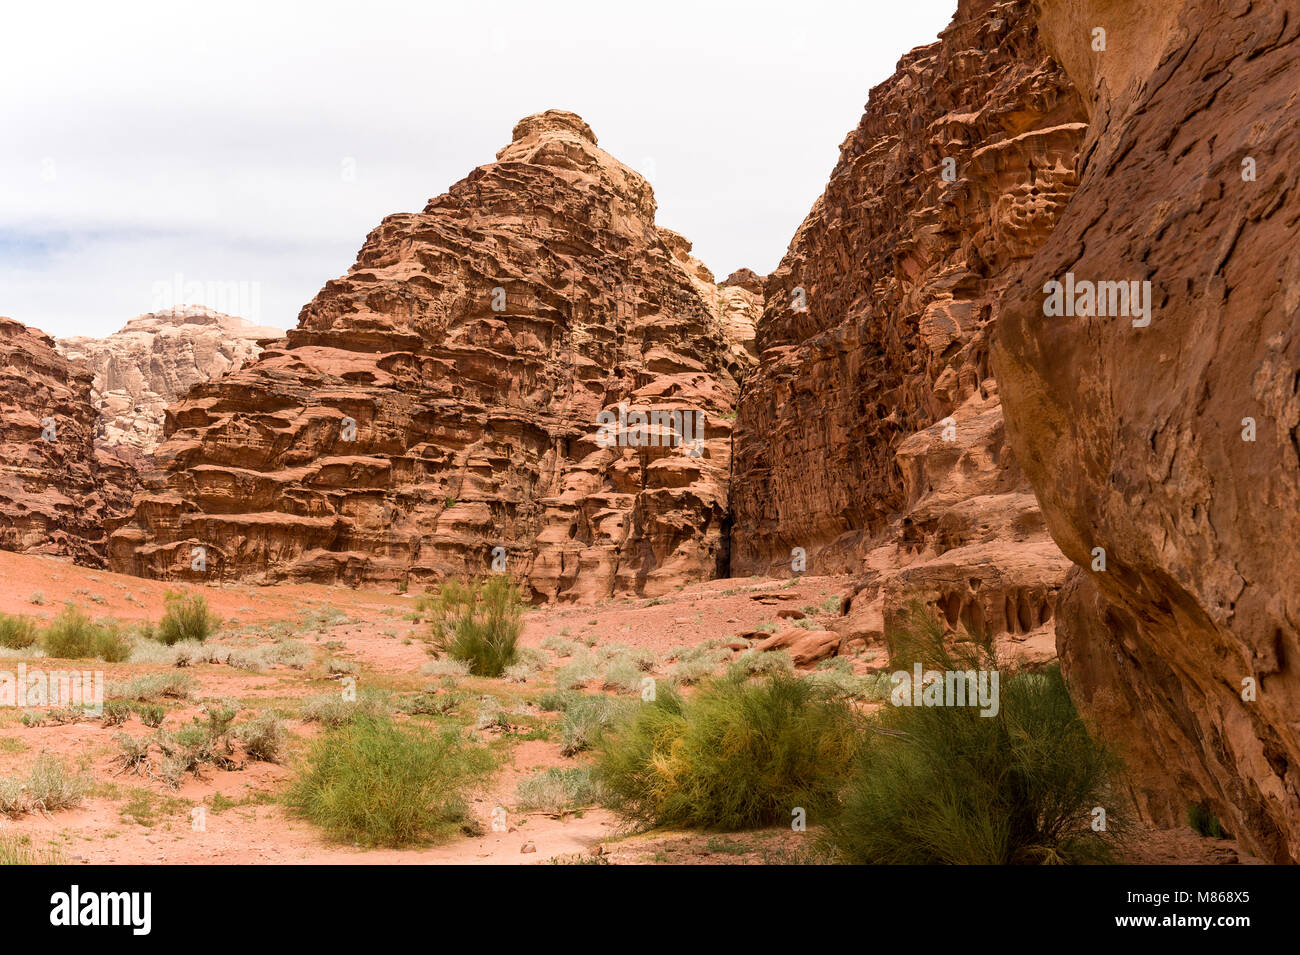 Wadi Rum , The Valley of the Moon, is a valley cut into the sandstone and granite rock in southern Jordan. It is the largest wadi in Jordan. Stock Photo